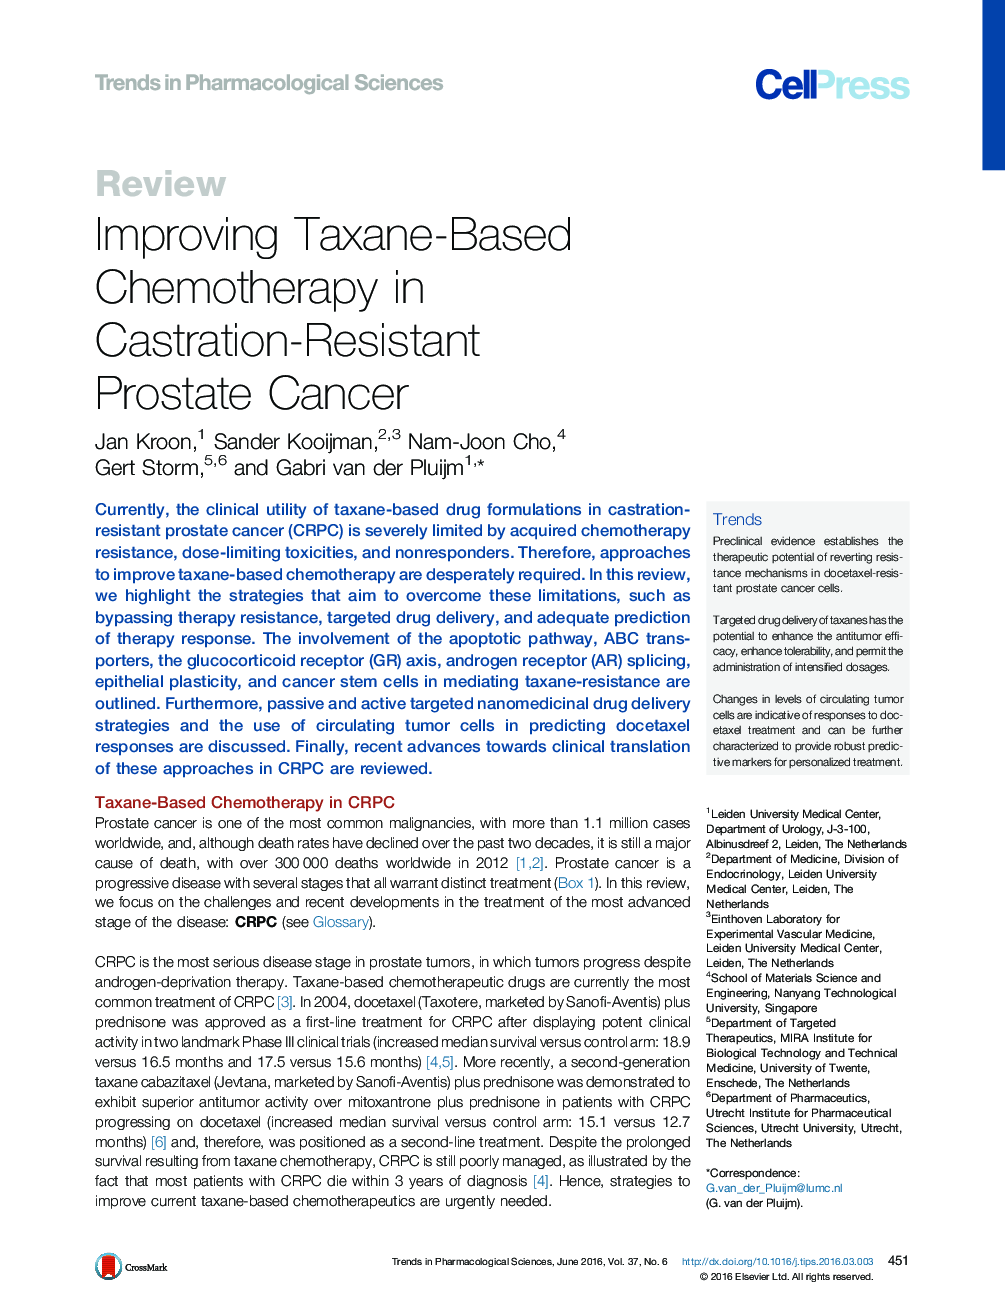 Improving Taxane-Based Chemotherapy in Castration-Resistant Prostate Cancer